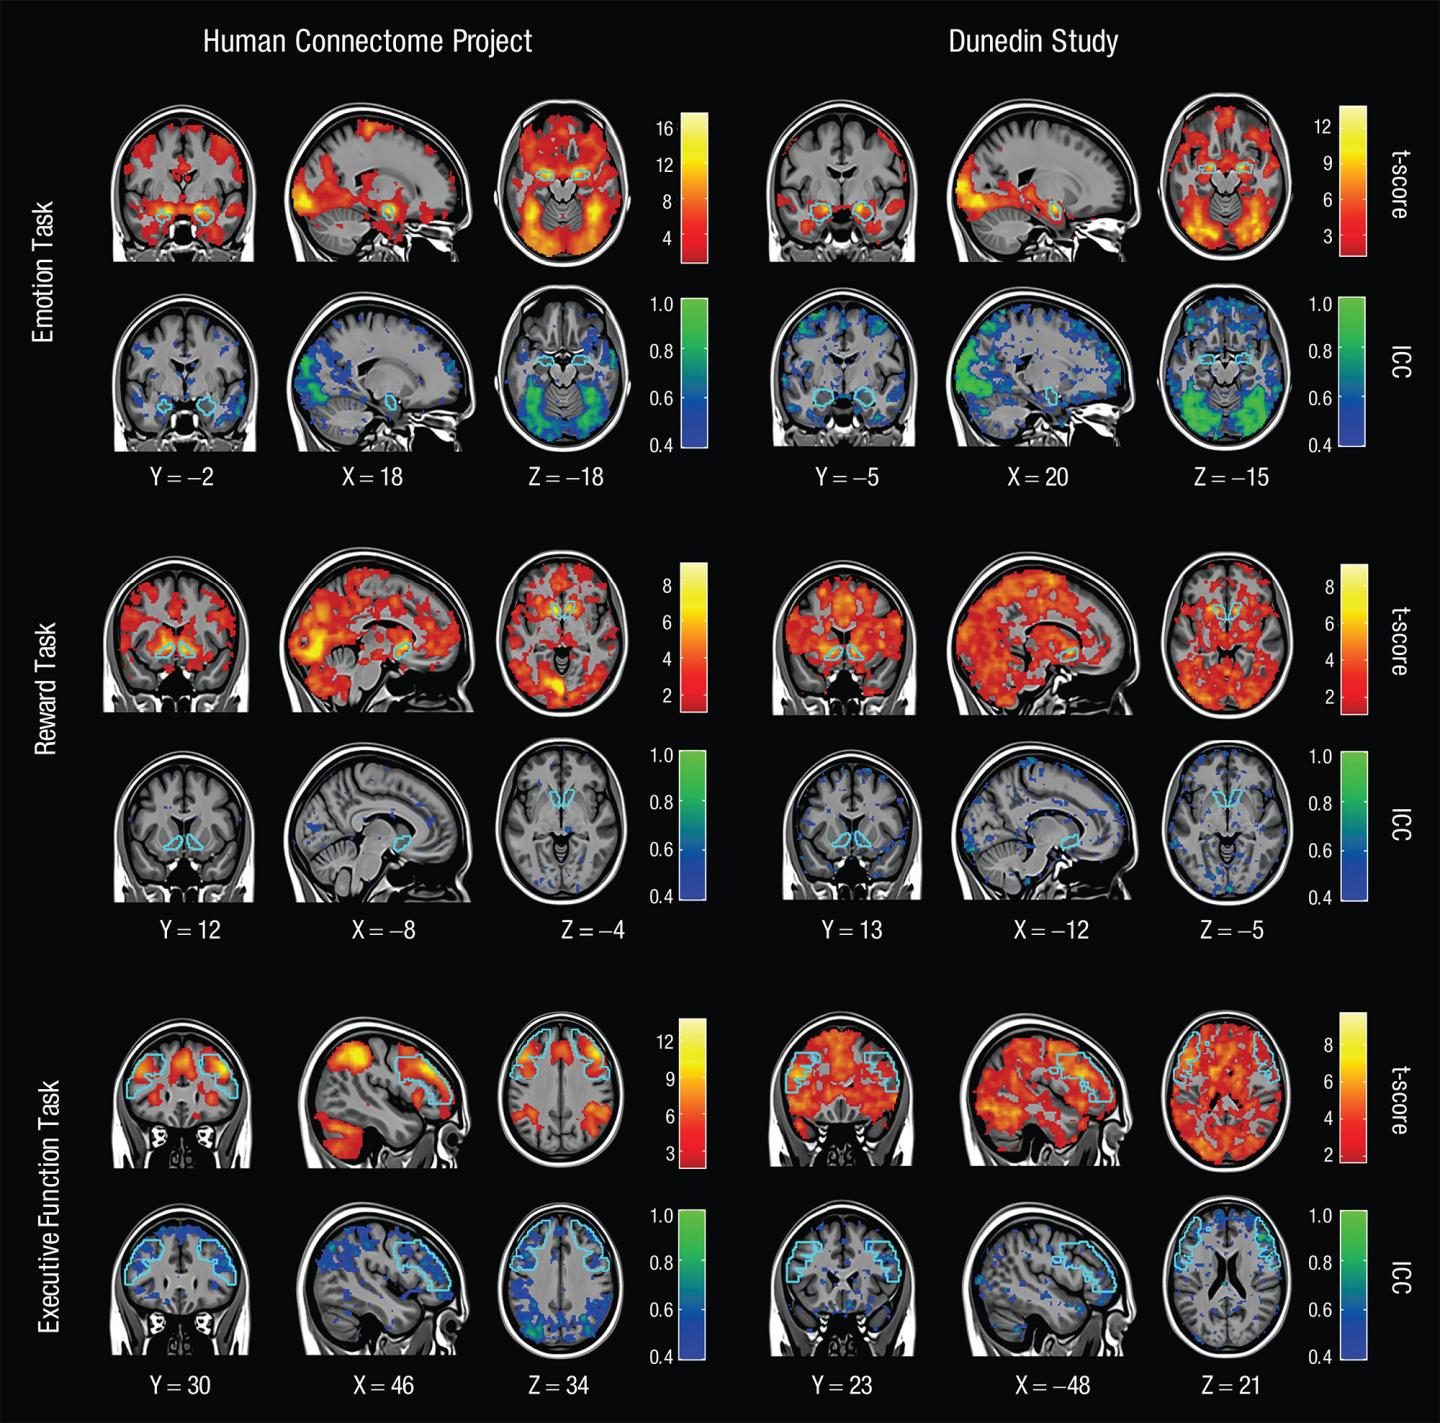 Two Days of fMRI Compared